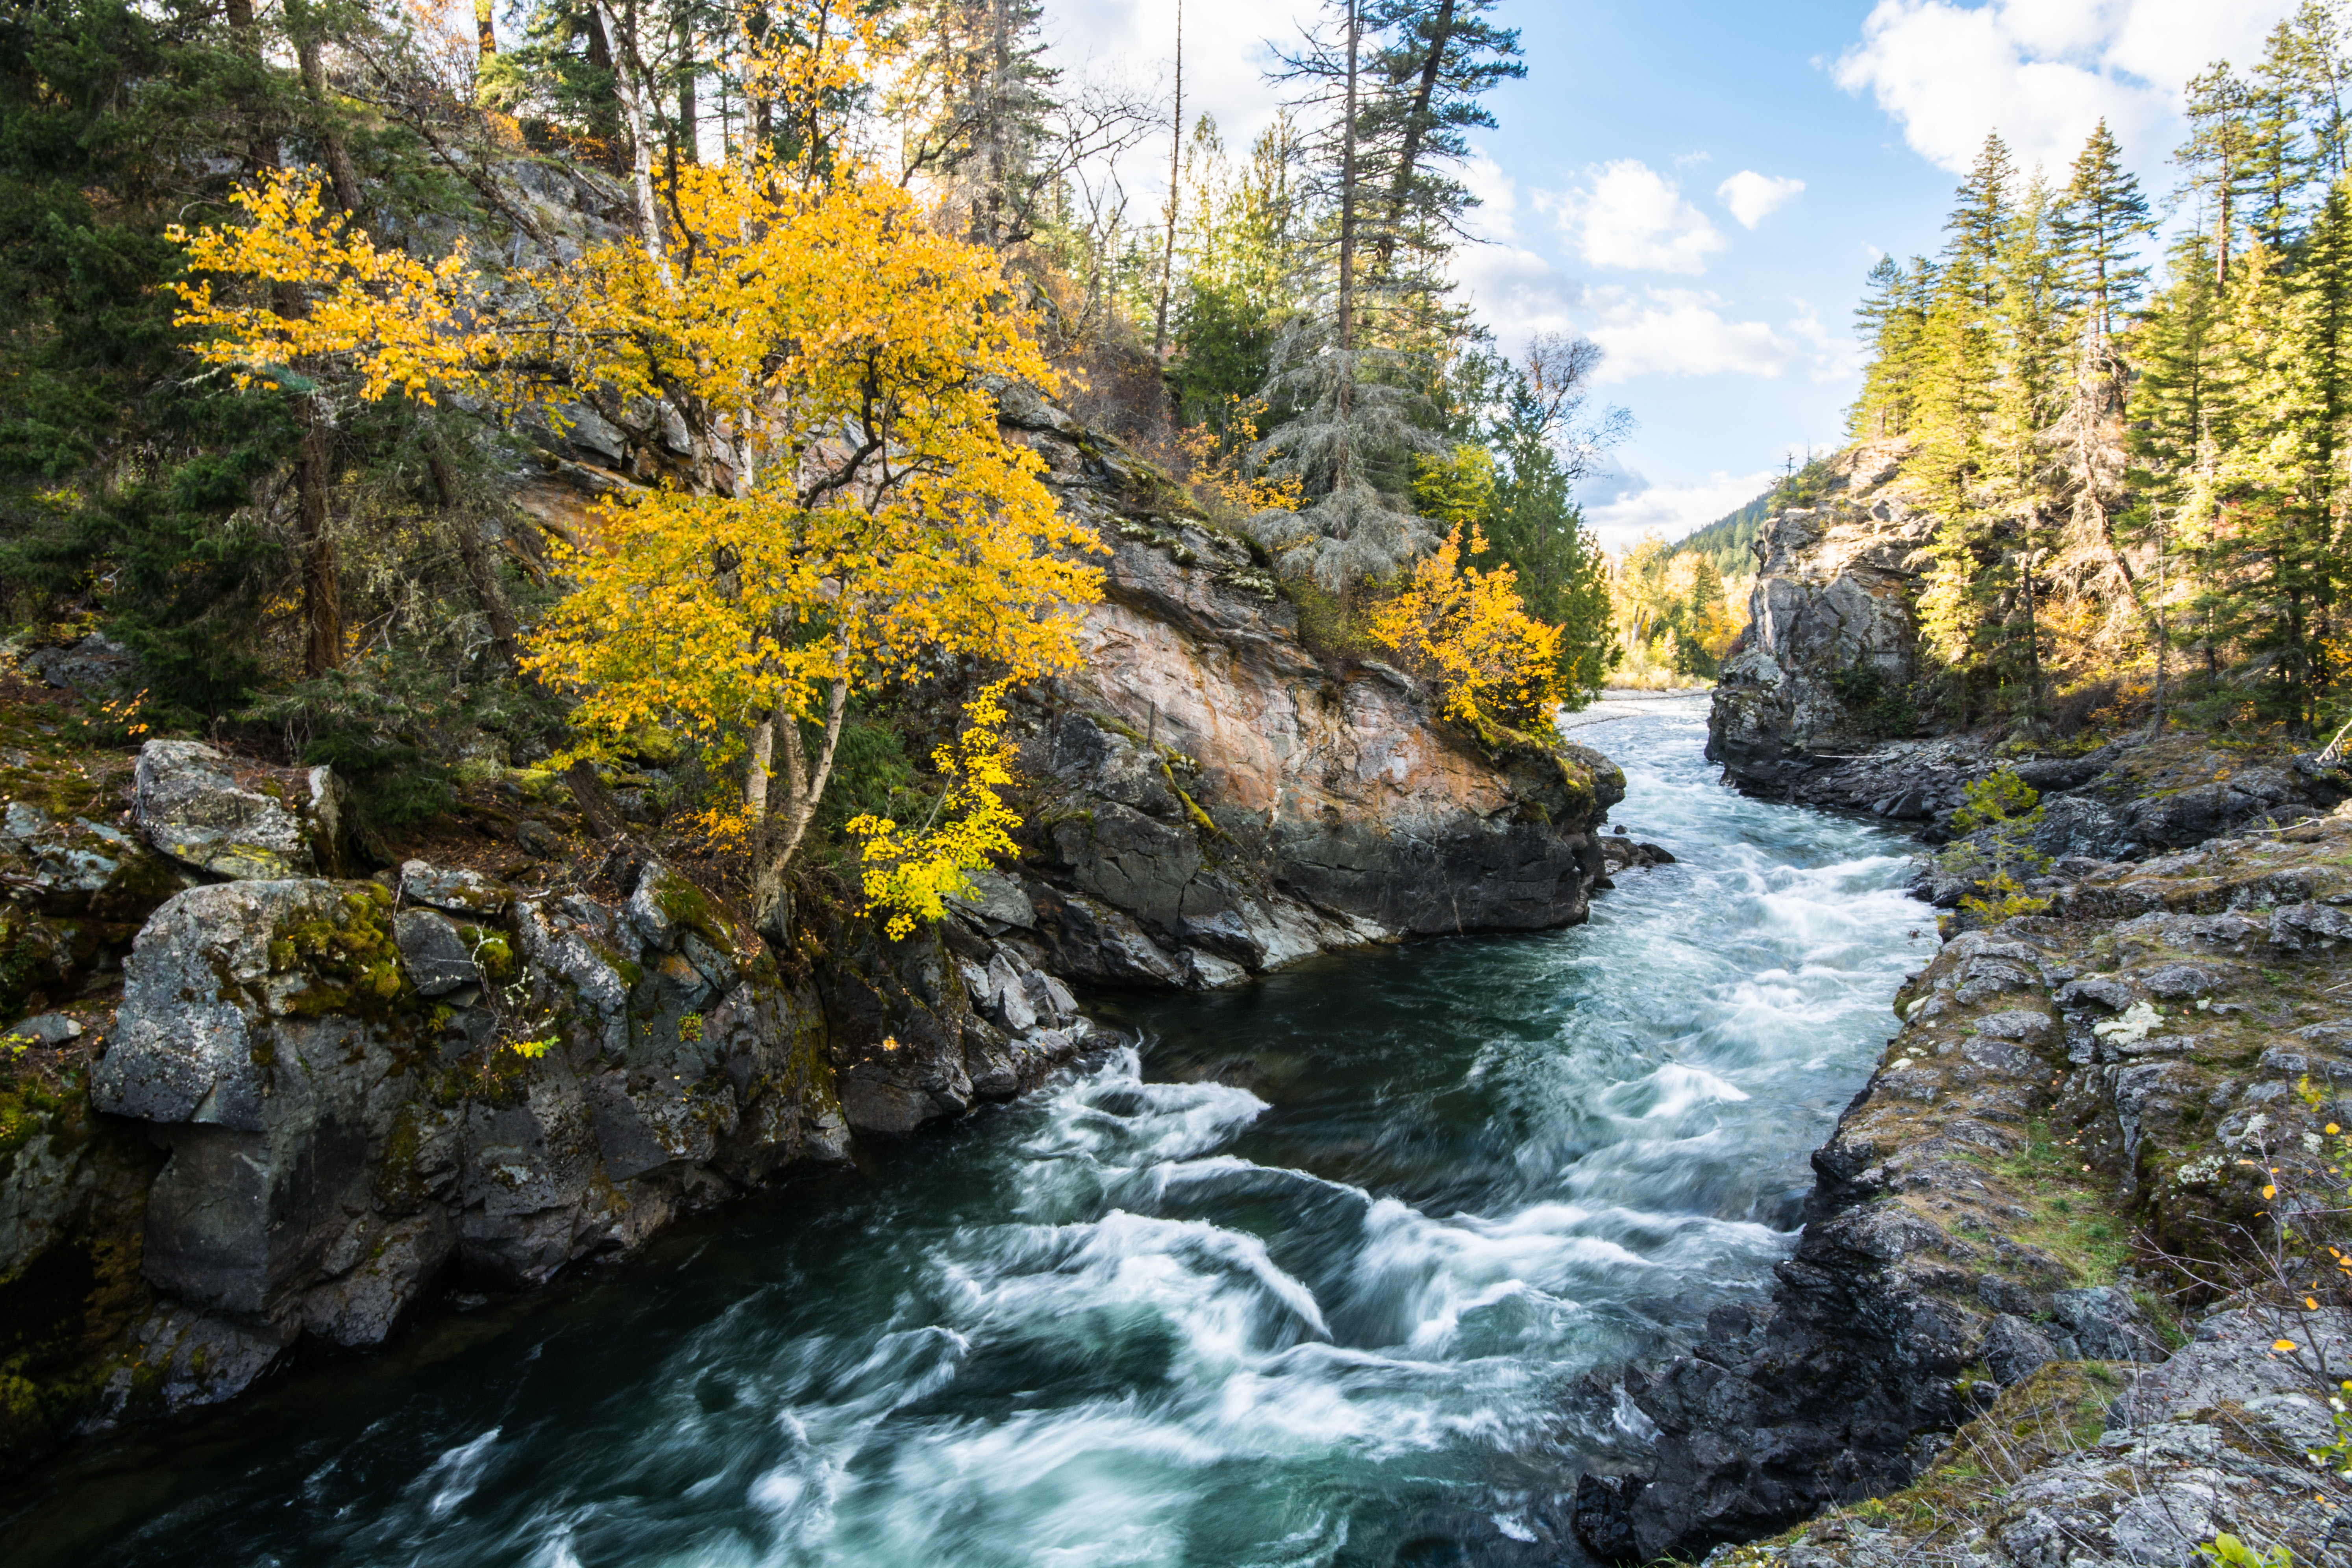 Fast flowing river surrounded by vibrant yellow trees and rocky cliffs.